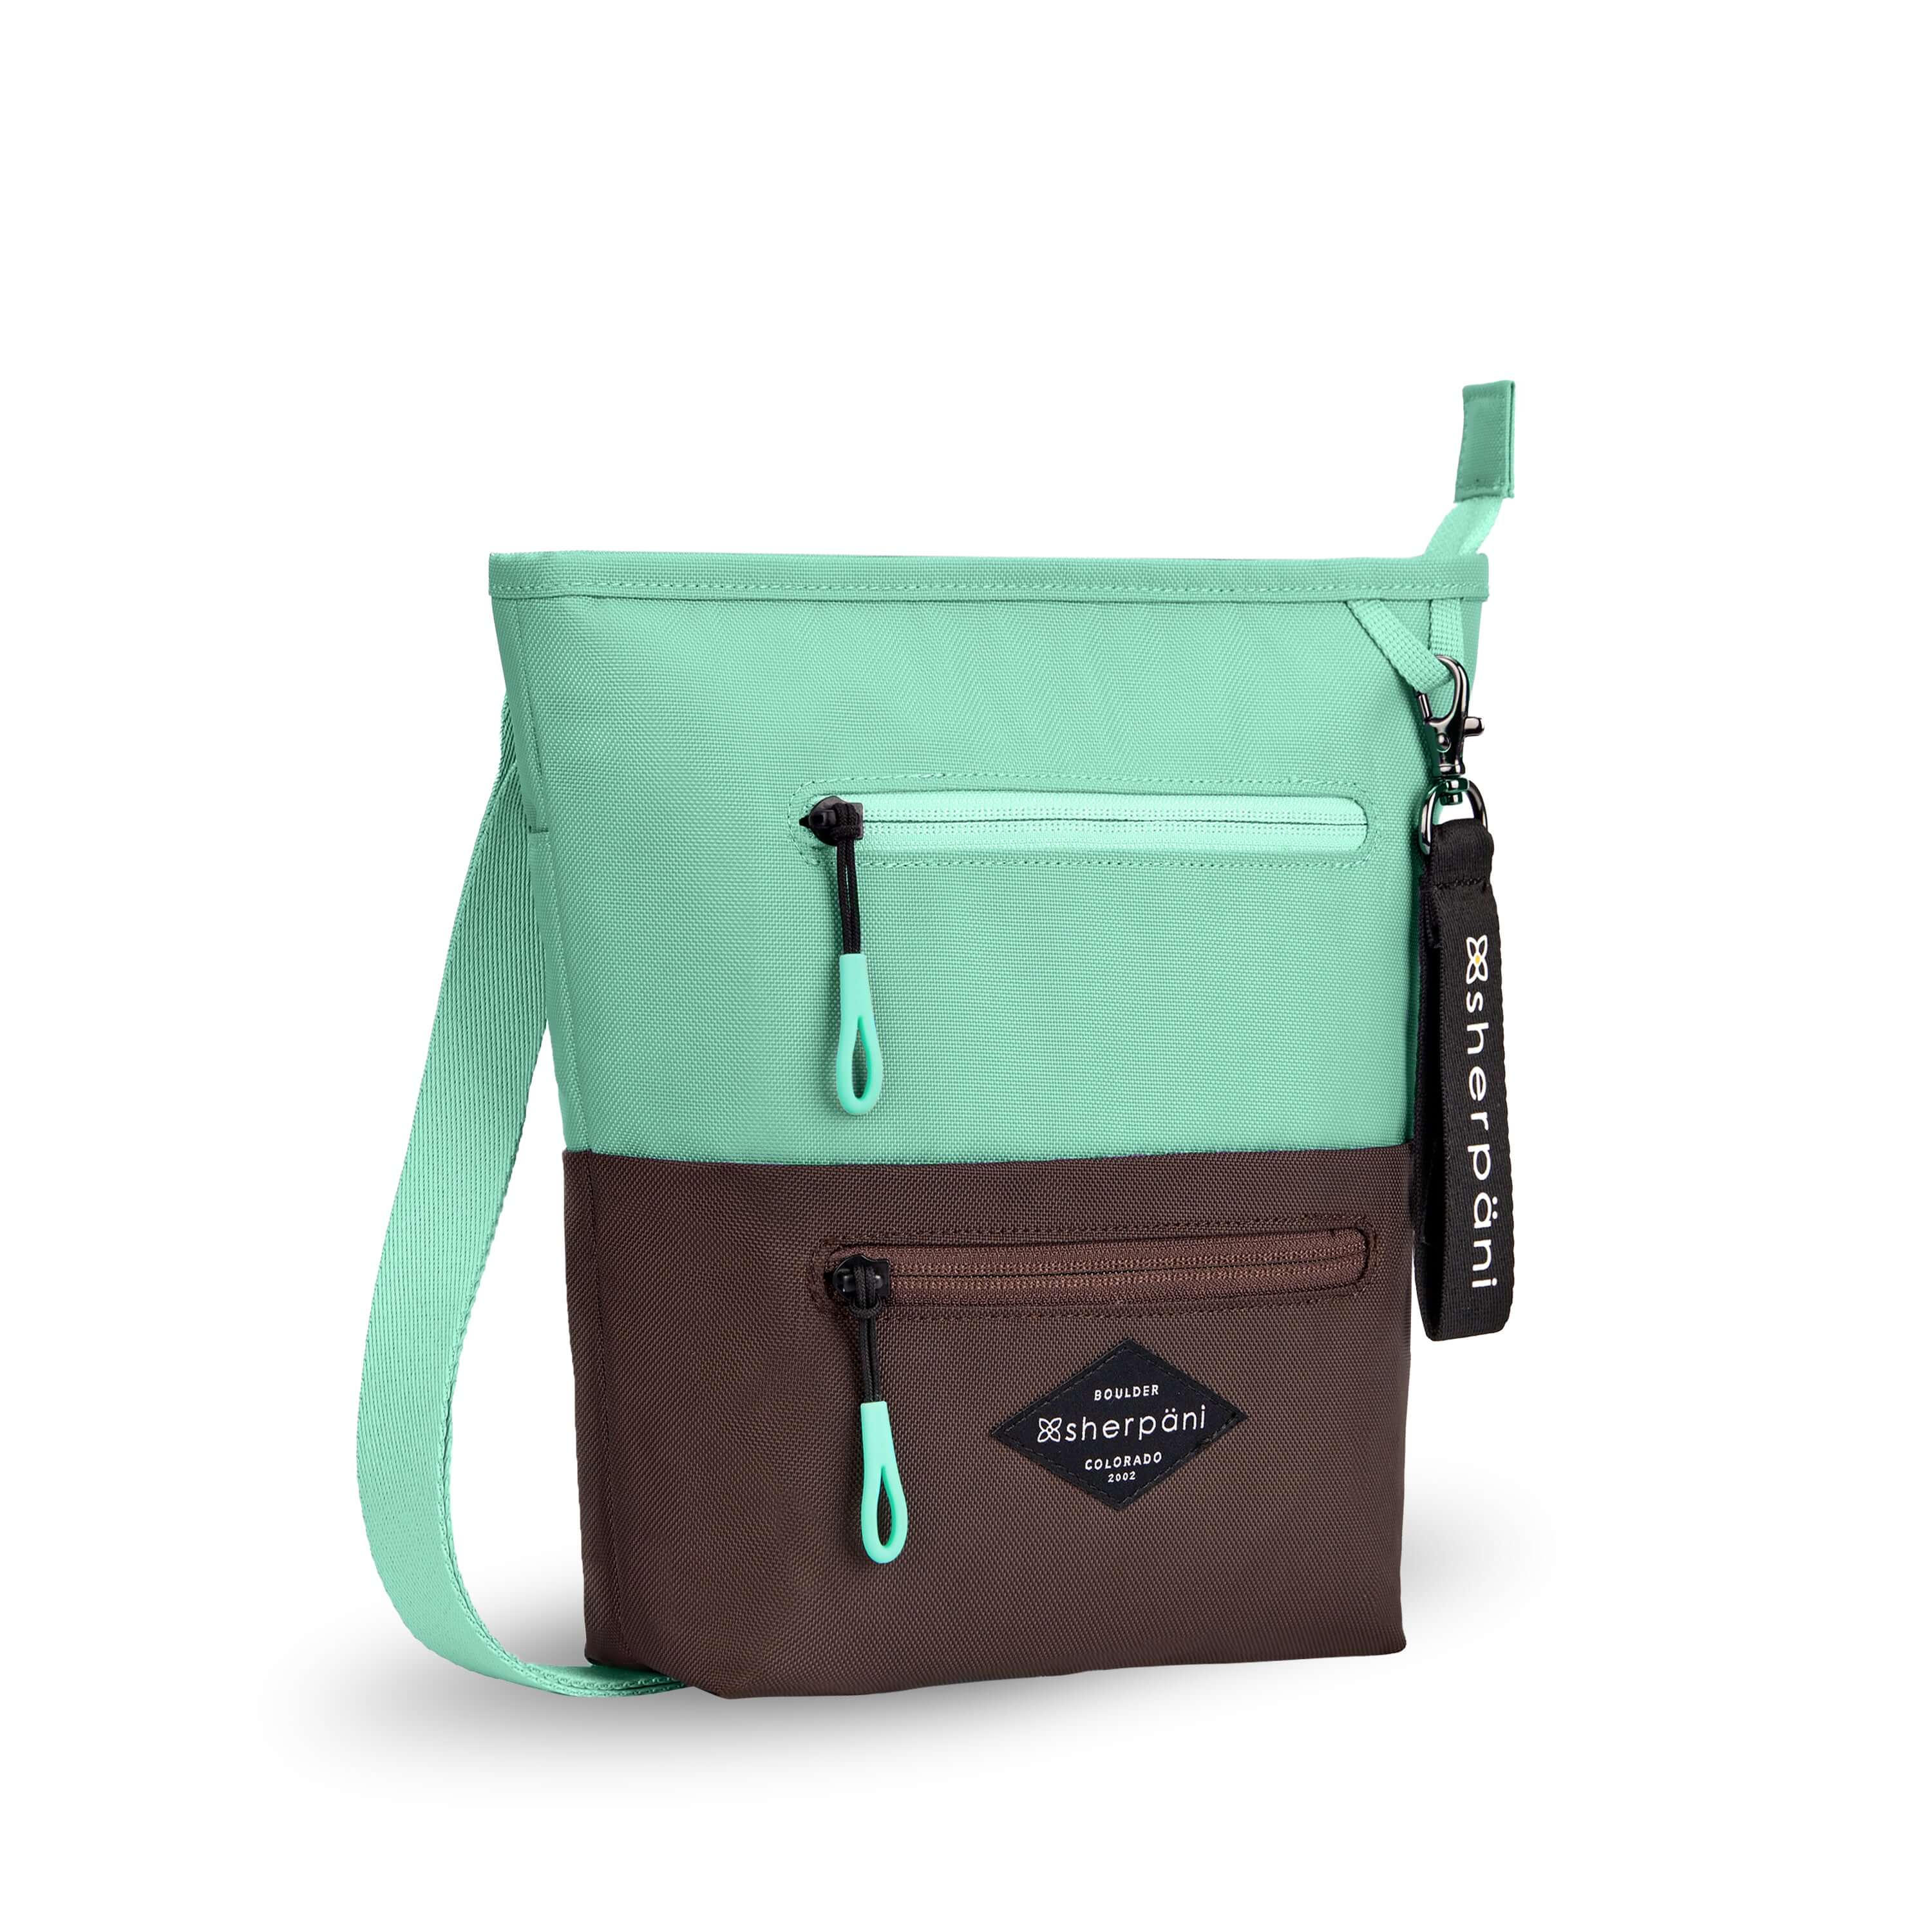 Angled front view of Sherpani’s crossbody, the Sadie, in Seagreen. The top half of the bag is light green and the bottom half of the bag is brown. It features two exterior zipper pockets on the front panel with easy-pull zippers accented in light green. A Sherpani branded keychain is attached to a fabric loop in the upper right corner. It has an adjustable crossbody strap.